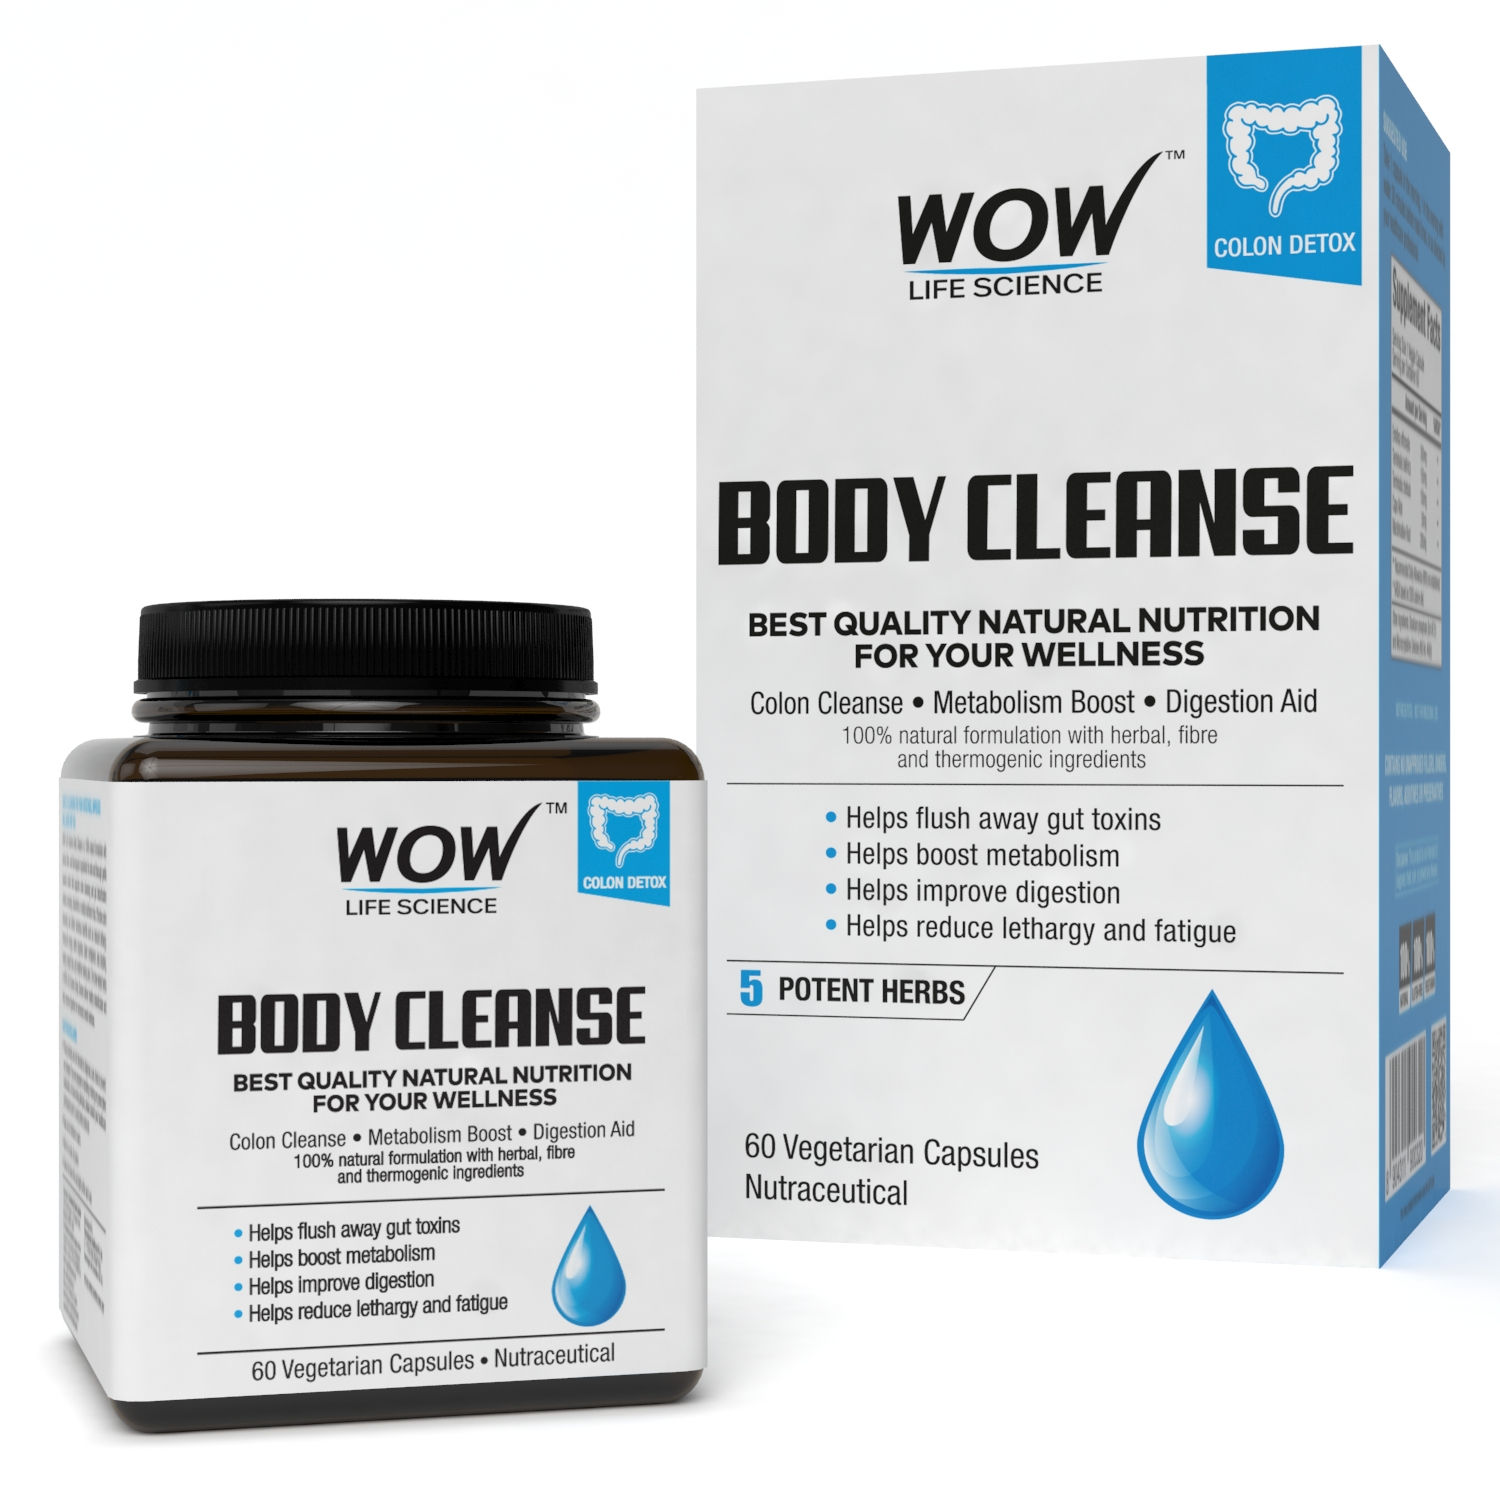 WOW Life Science Body Cleanse Capsules